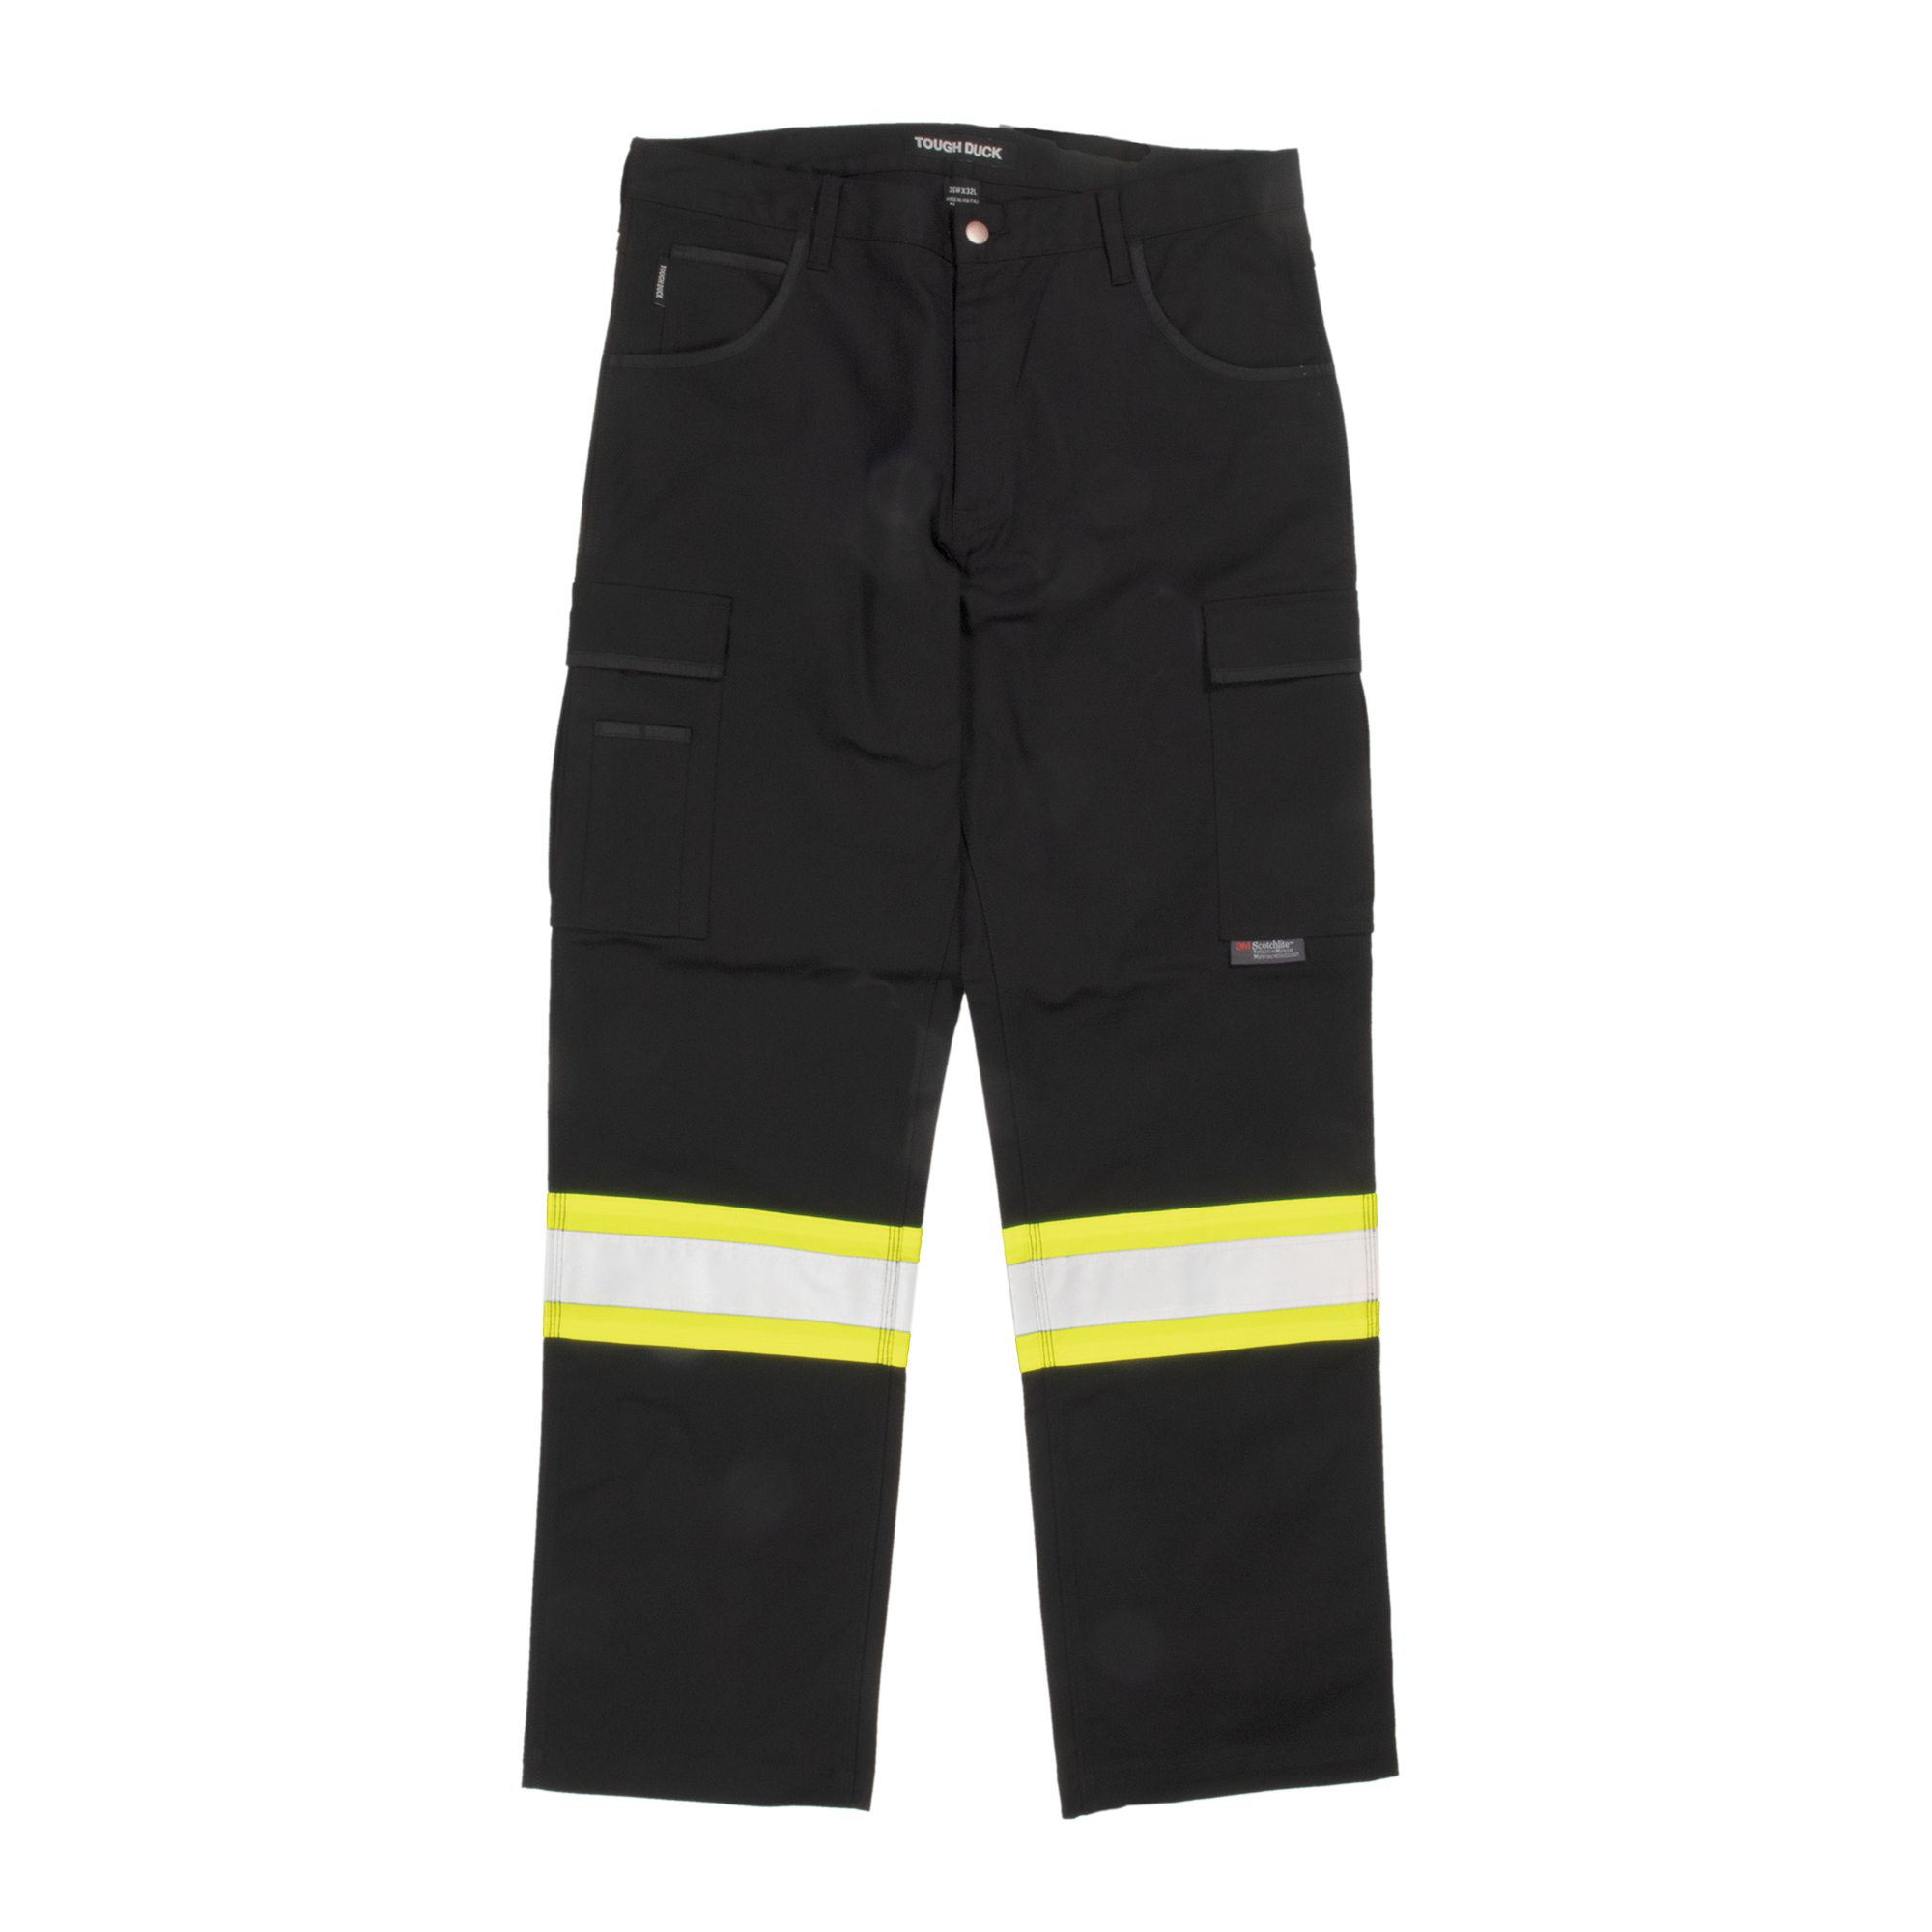 Tough Duck, Flex Twill Safety Cargo Pant, Waist 40 in, Inseam 30 in, Color Black, Model SP030